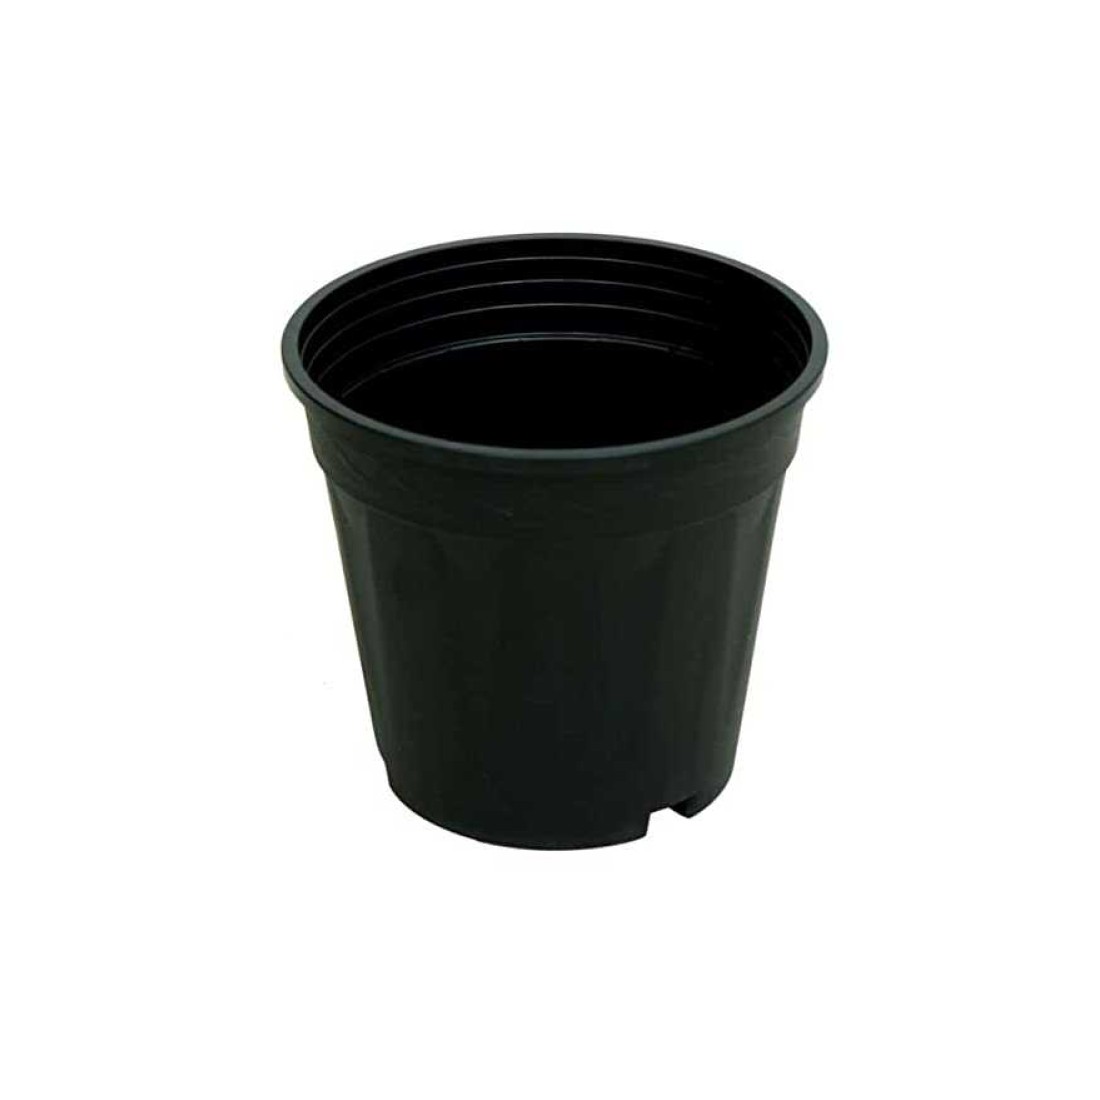 Round Black Nursery Plastic Pot /Grower Pot (size 6inches) pack of 20 pots 1